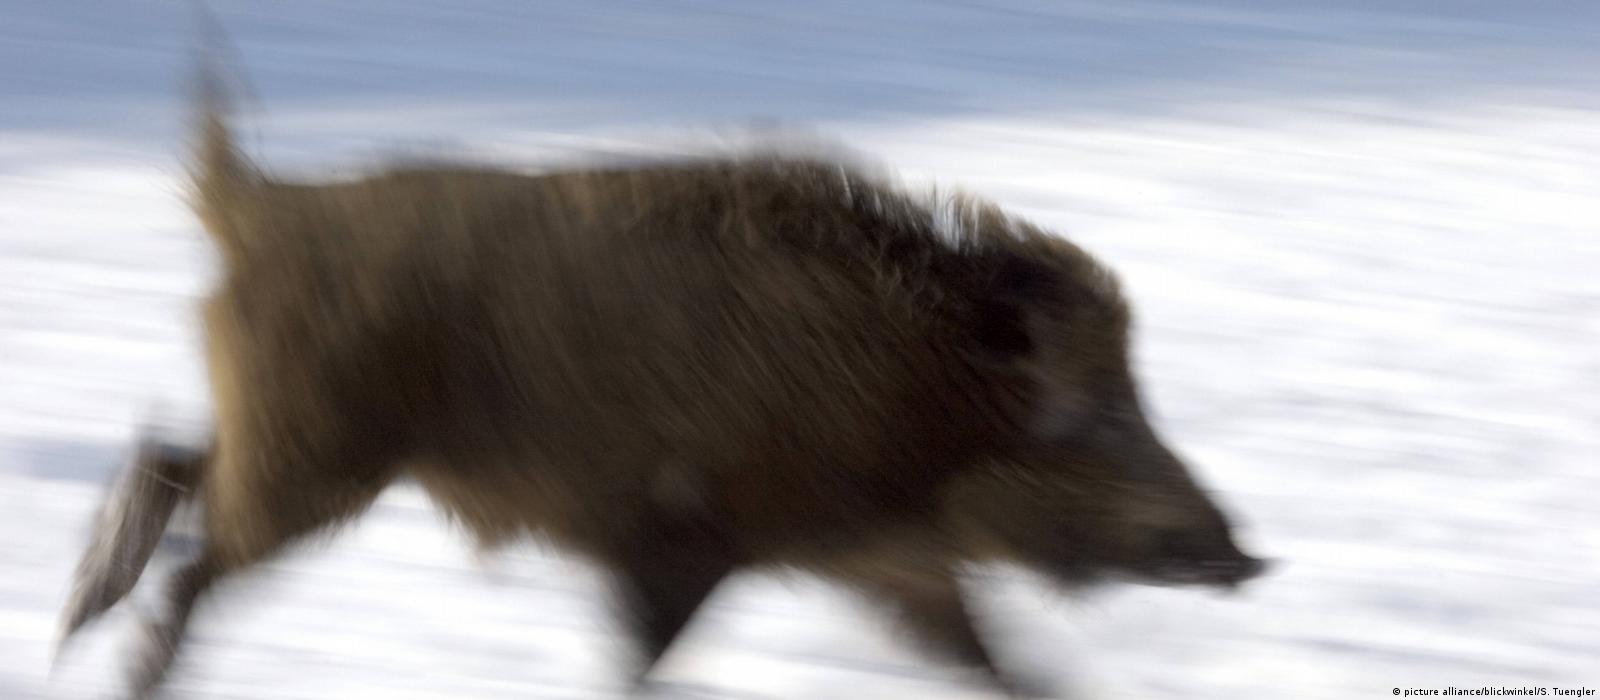 German wild boars go on the rampage – DW – 01/29/2017